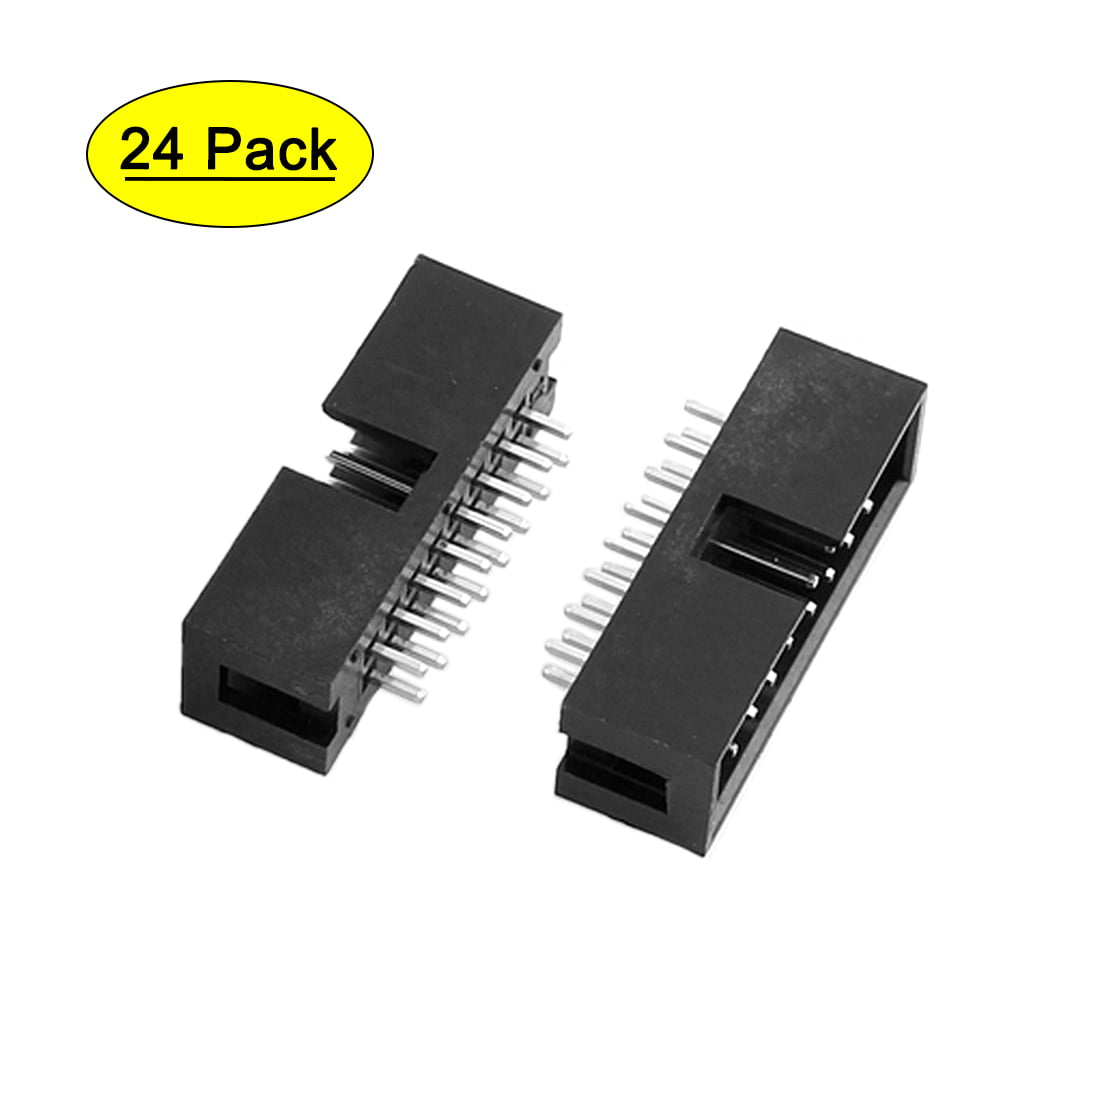 20pcs Pitch 2mm 2.0mm 2x7 Pin 14 Pin IDC FC Female Header Socket Cable Connector 